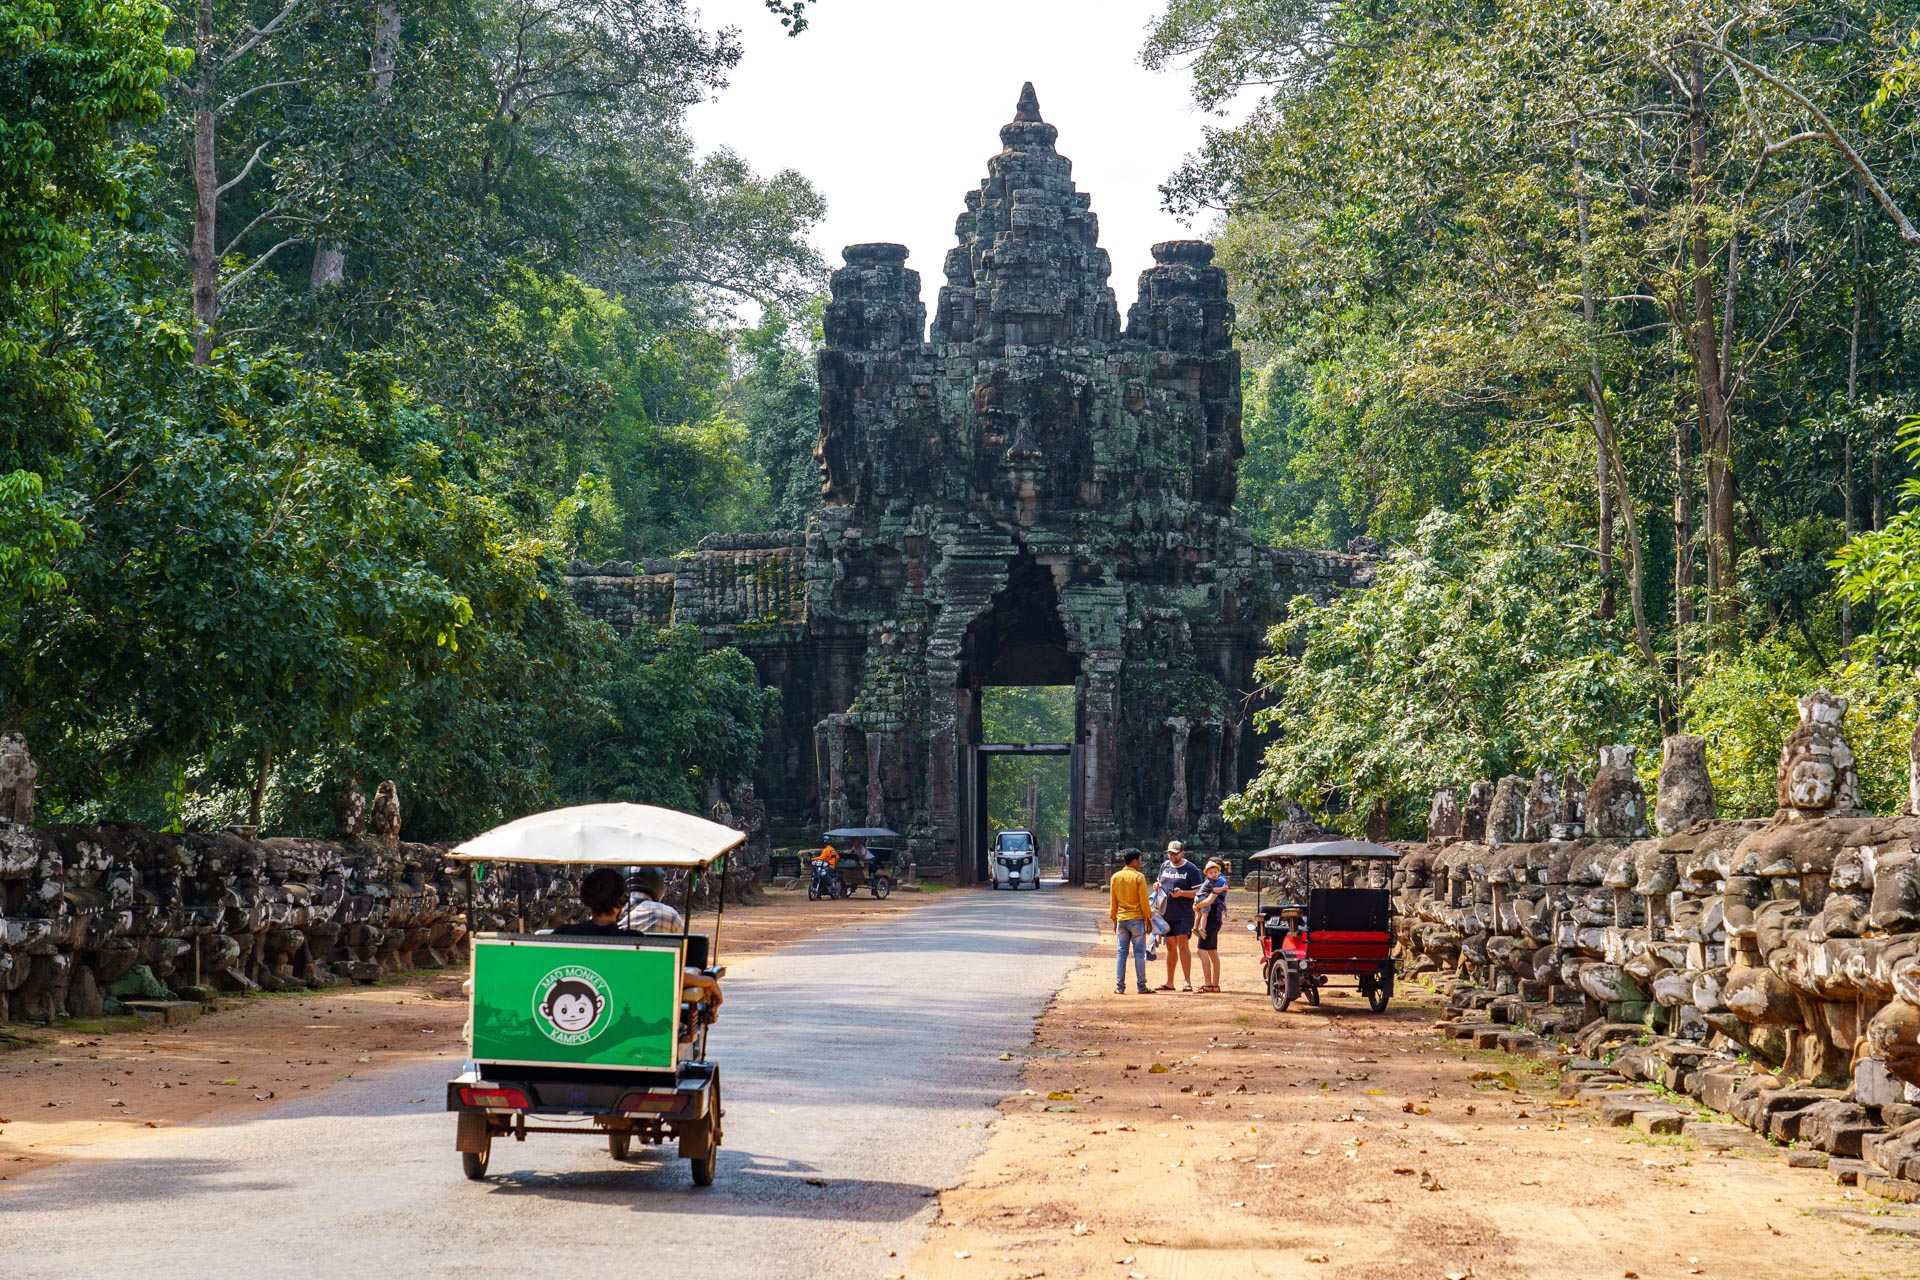 /fm/Files//Pictures/Ido Uploads/Asia/cambodia/All/Angkor Wat - Angkor Tom Gate - SS.jpg